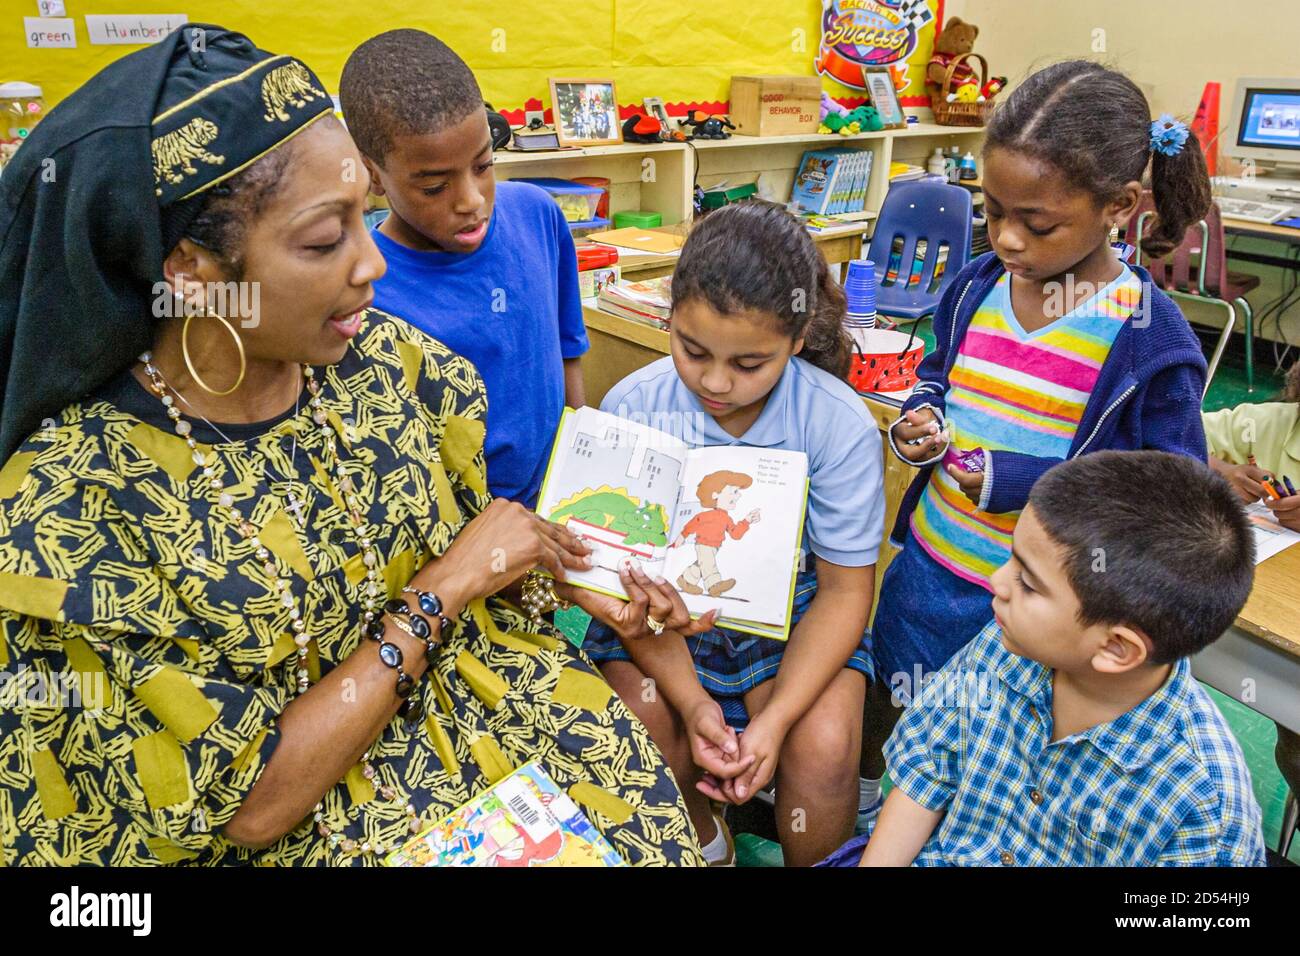 Miami Florida,Overtown,Frederick Douglass Elementary School,teacher dressed outfit,literary costume reading book fictional character,Hispanic Black Af Stock Photo